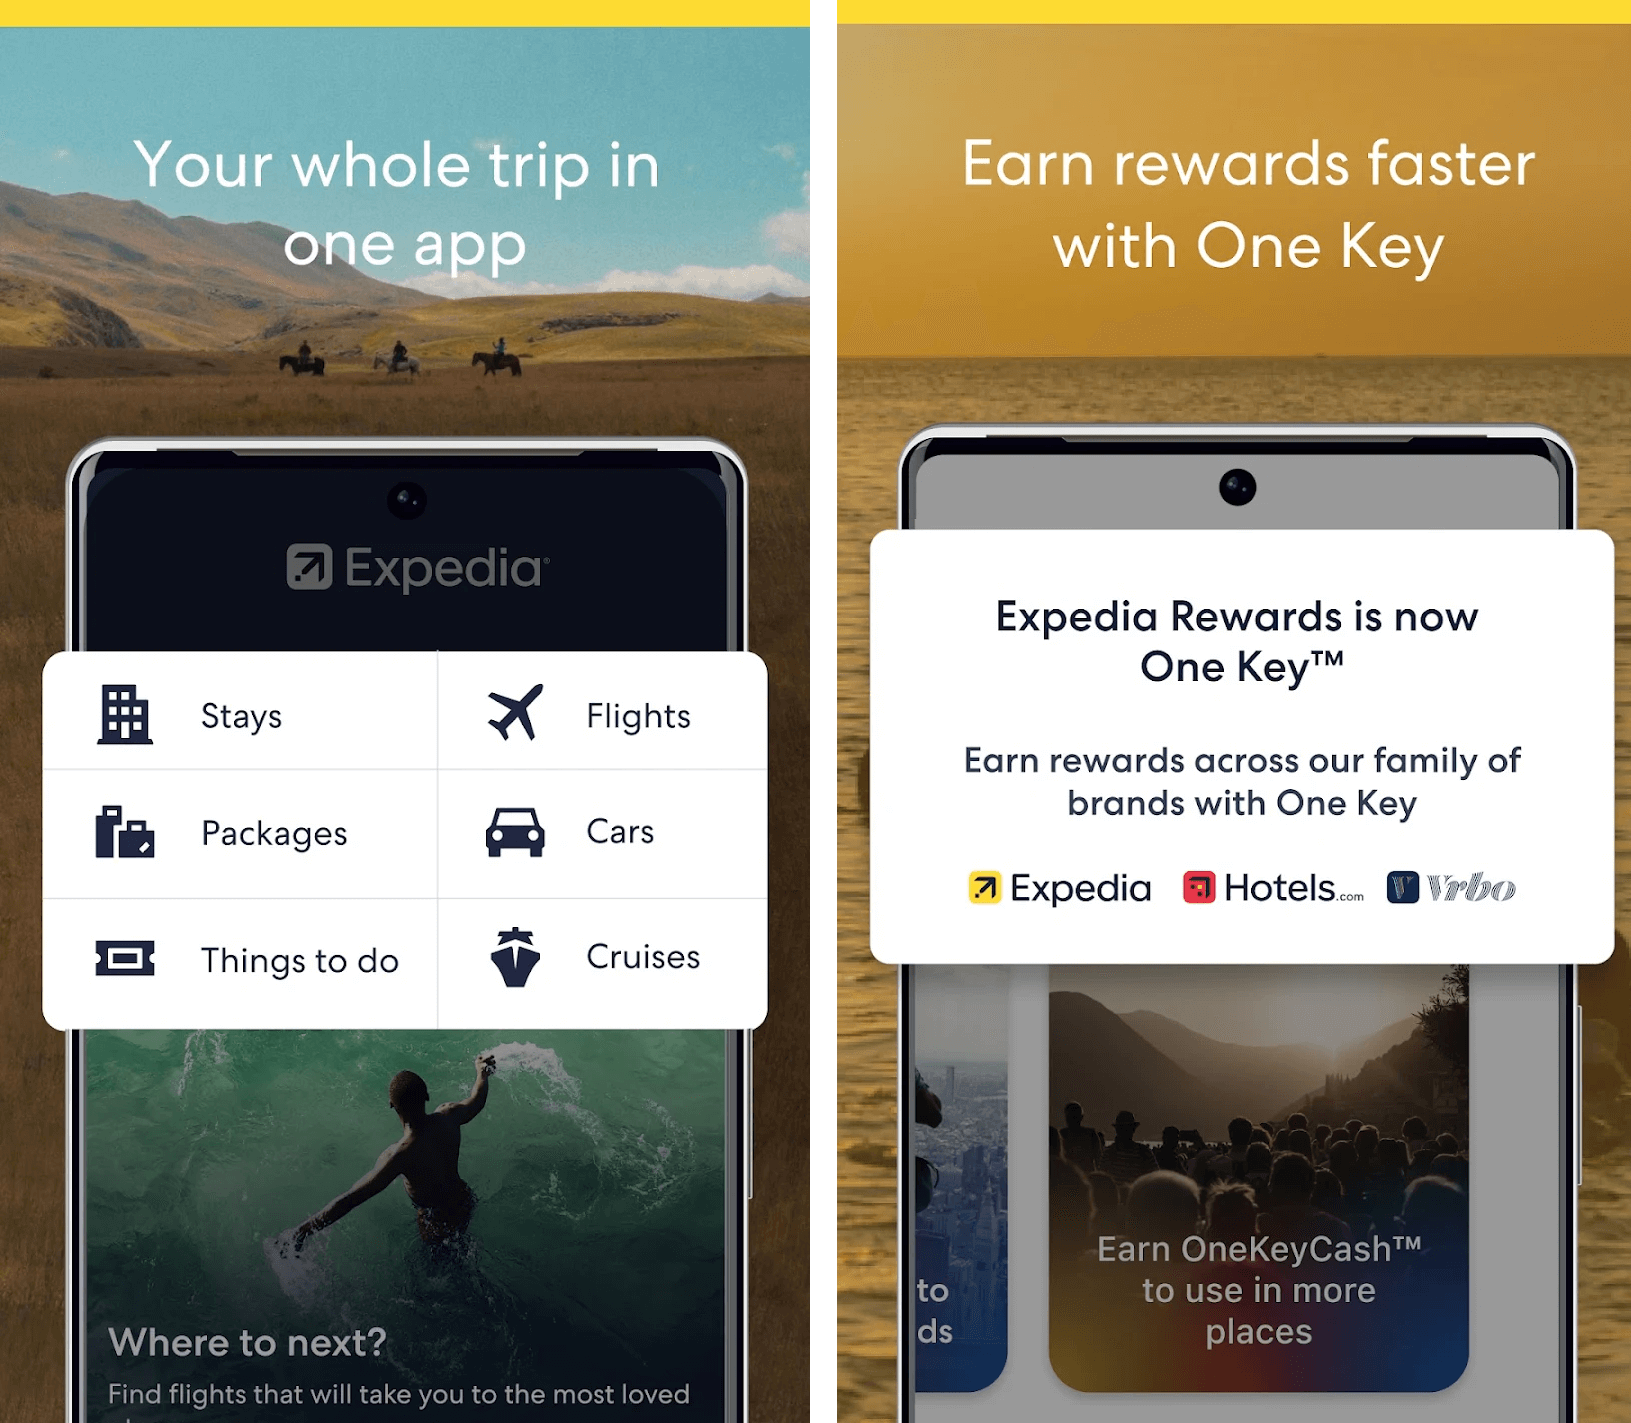 Must-have Features of an App Like Expedia